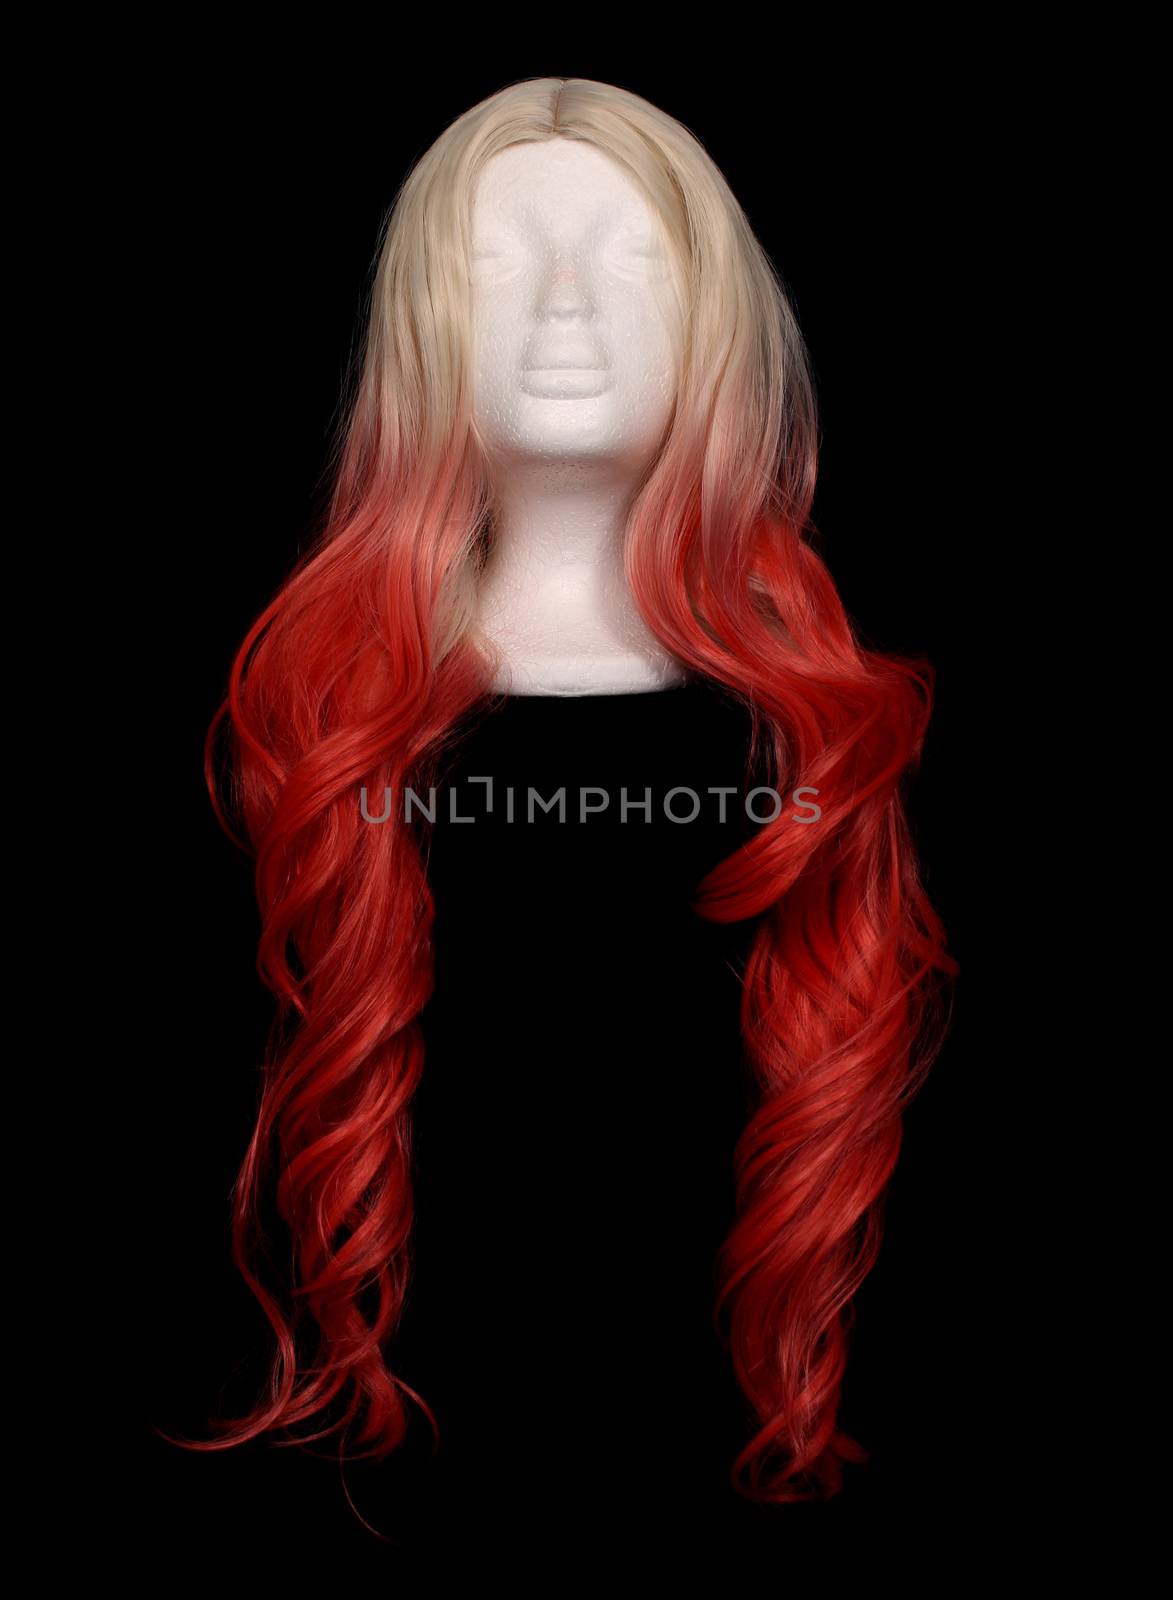 Blond and Orange Ombre Wig on Mannequin by Marti157900